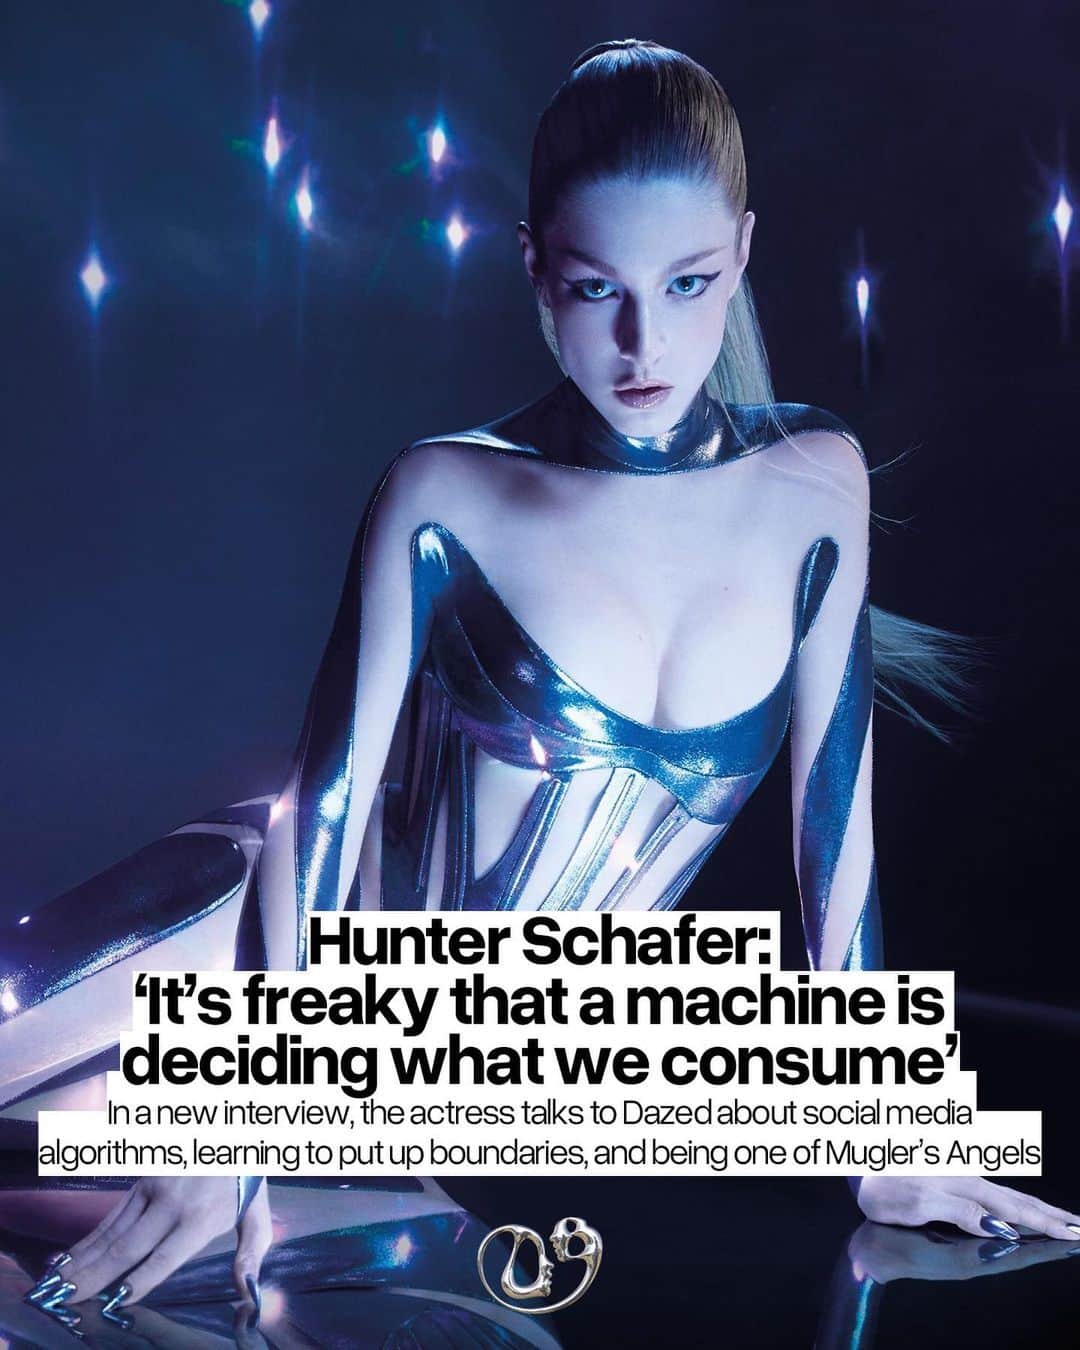 Dazed Magazineのインスタグラム：「@hunterschafer is now one of the @muglerofficial Angel girls 🖤👼 ⁠ “I had the privilege of going to the Thierry Mugler exhibition at the Brooklyn Museum,” she says. “There’s a whole room devoted to the fragrance and they had all the different iterations of the bottles over the decades and the different campaigns, and then mine was at the very end. I couldn’t believe it. It felt historic.”⁠ ⁠ When Mugler’s Angel Eau de Parfum came out in 1992, it forever changed the perfume world. Whether you hate it or love it, in the years since it’s been impossible to miss. “The fragrance just feels really in line with who I am and how I like to navigate fashion and assemble myself. It has these contrasting elements of strength and power but also soft and sensual.”⁠ ⁠ Tap the link in bio to read our full interview with Schafer on everything from social media algorithms, learning to put up boundaries and being one of Mugler’s Angels 🔗⁠ ⁠ ✍️ @abkpeters⁠ 📸 Courtesy of Mugler⁠ ⁠ #DazedBeauty #Mugler #HunterSchafer」